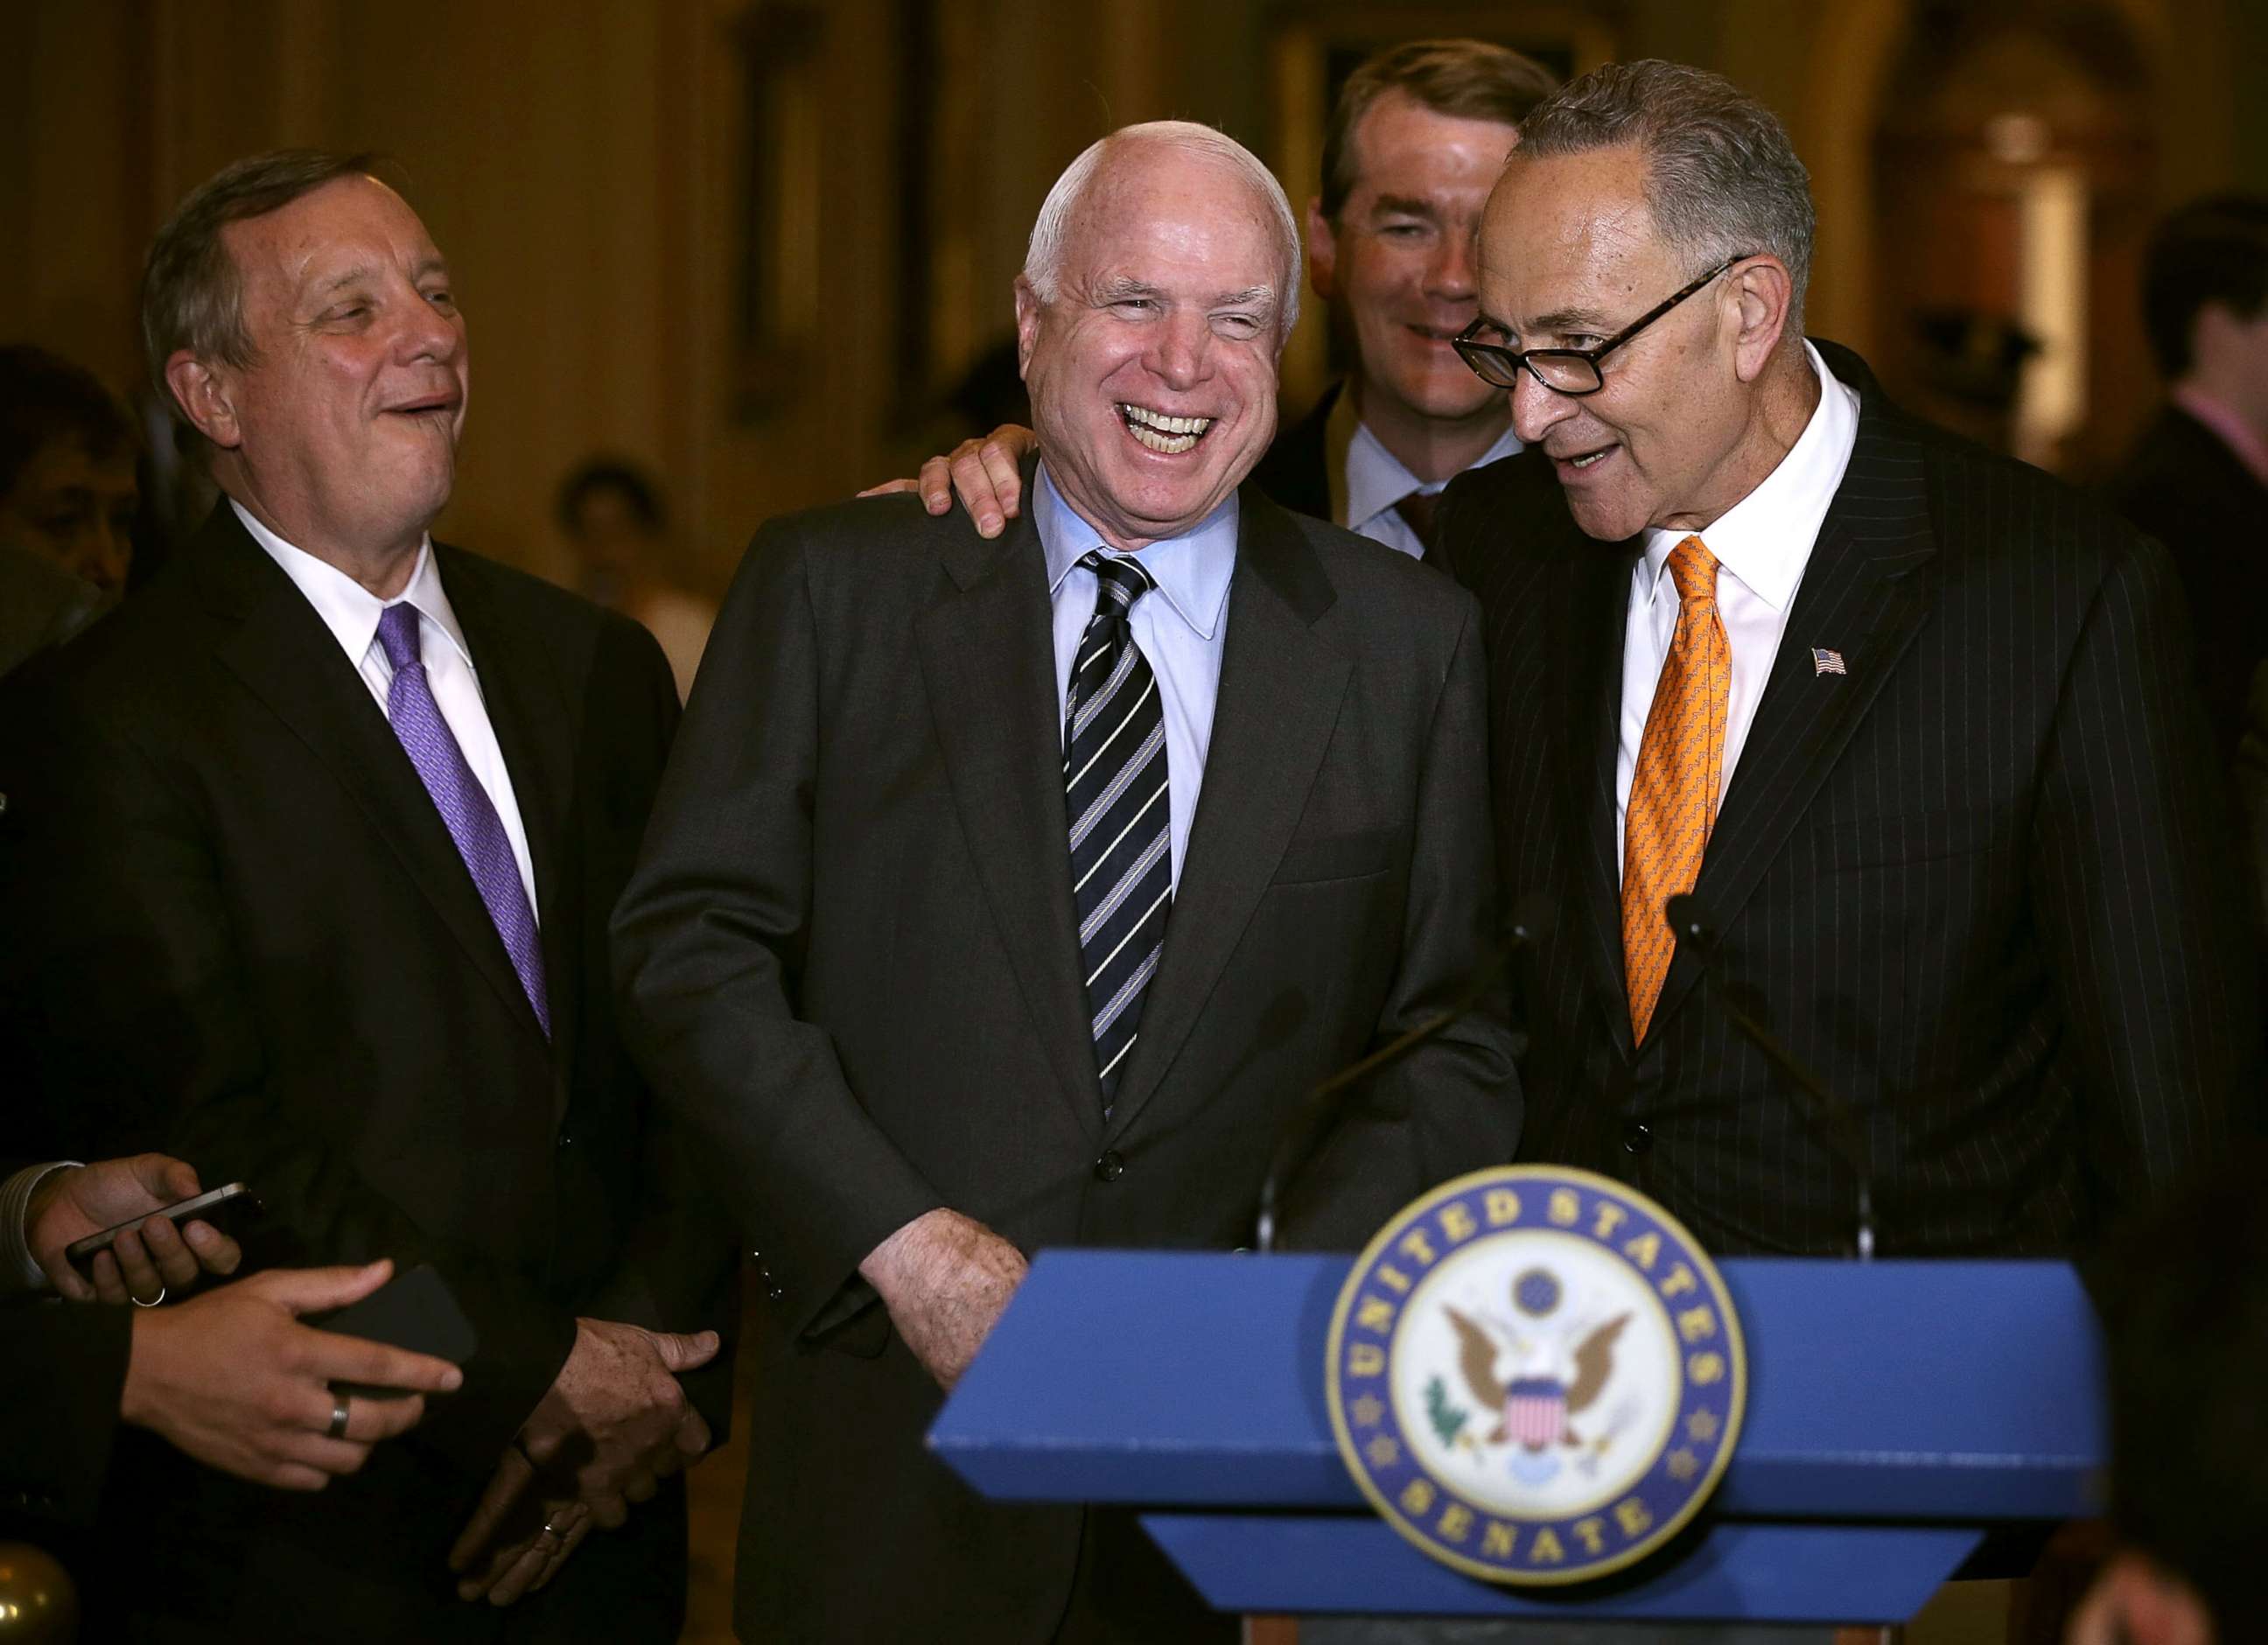 PHOTO: Sen. John McCain and Sen. Charles Schumer share a moment as they speak to members of the press outside the Senate Chamber, June 27, 2013, at the U.S. Capitol in Washington.